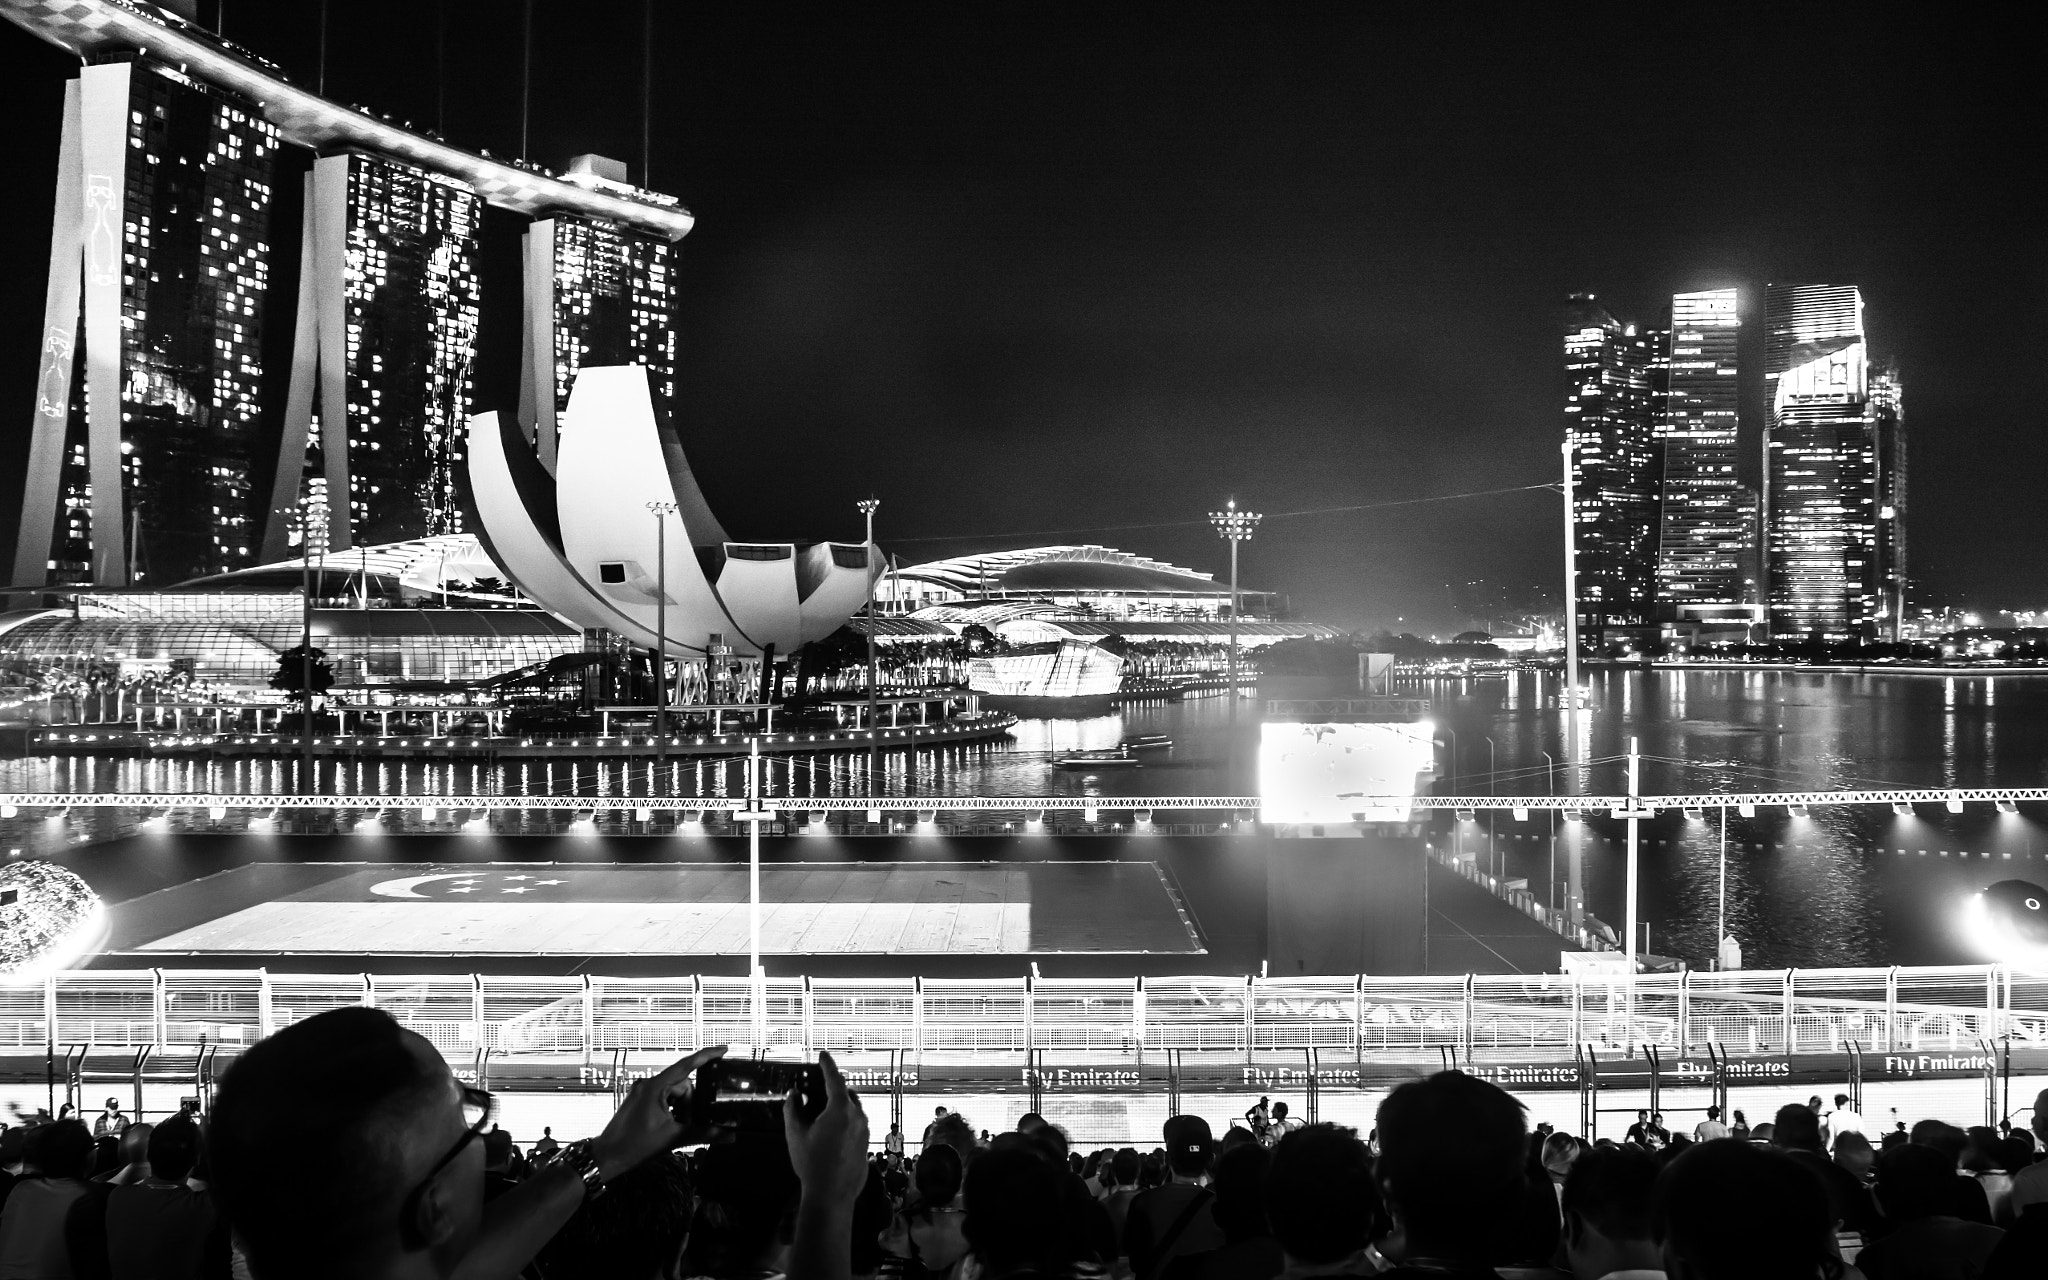 Olympus PEN-F sample photo. View from the f1 grand stand photography